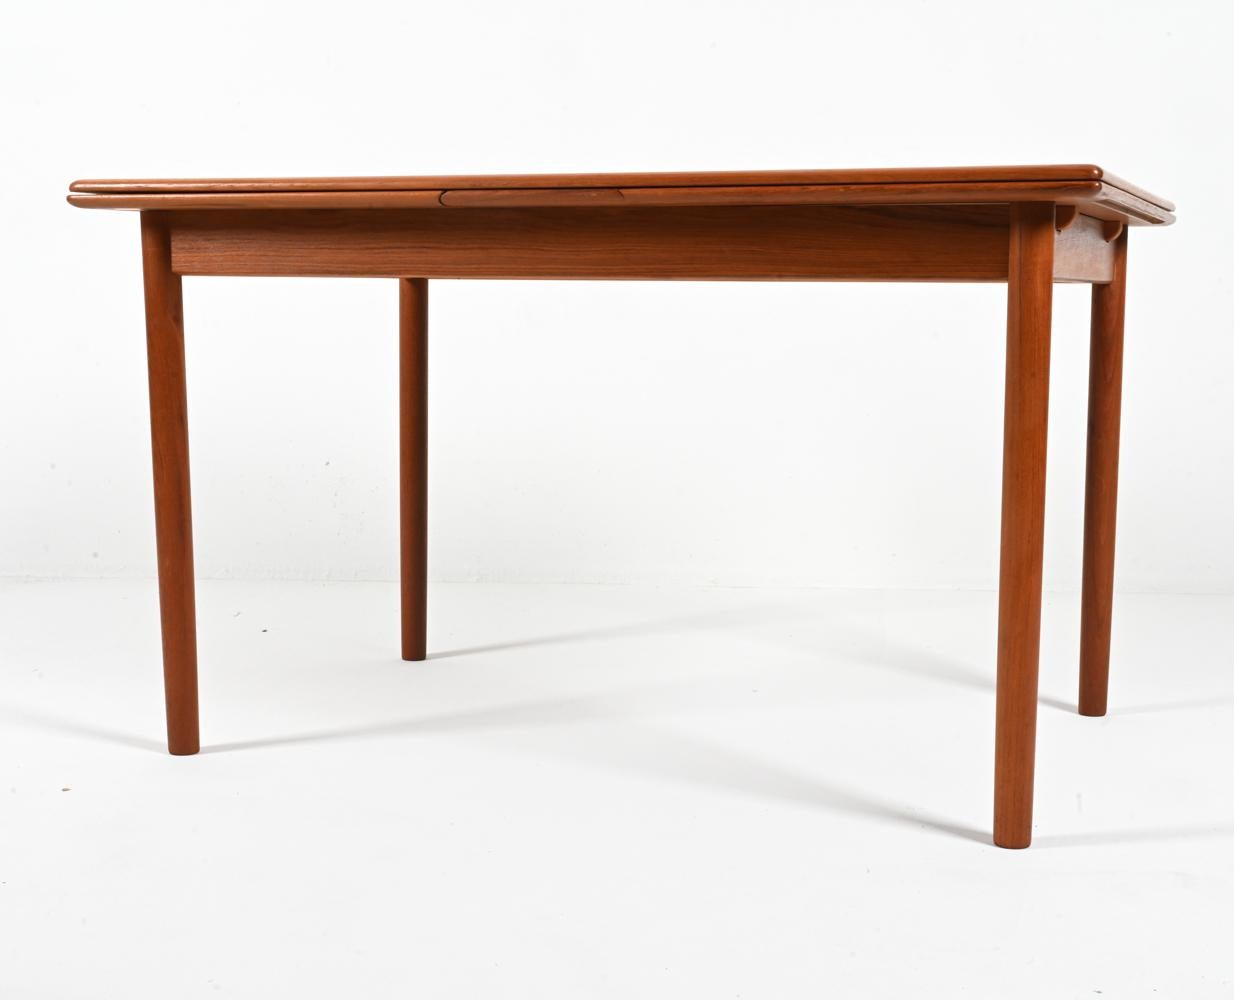 Presenting a classic Danish Mid-Century dining table in pristine vintage condition, designed by Niels Otto Møller for J.L. Møllers Møbelfabrik and crafted from luminous teak wood. This example features a rectangular silhouette with simple round